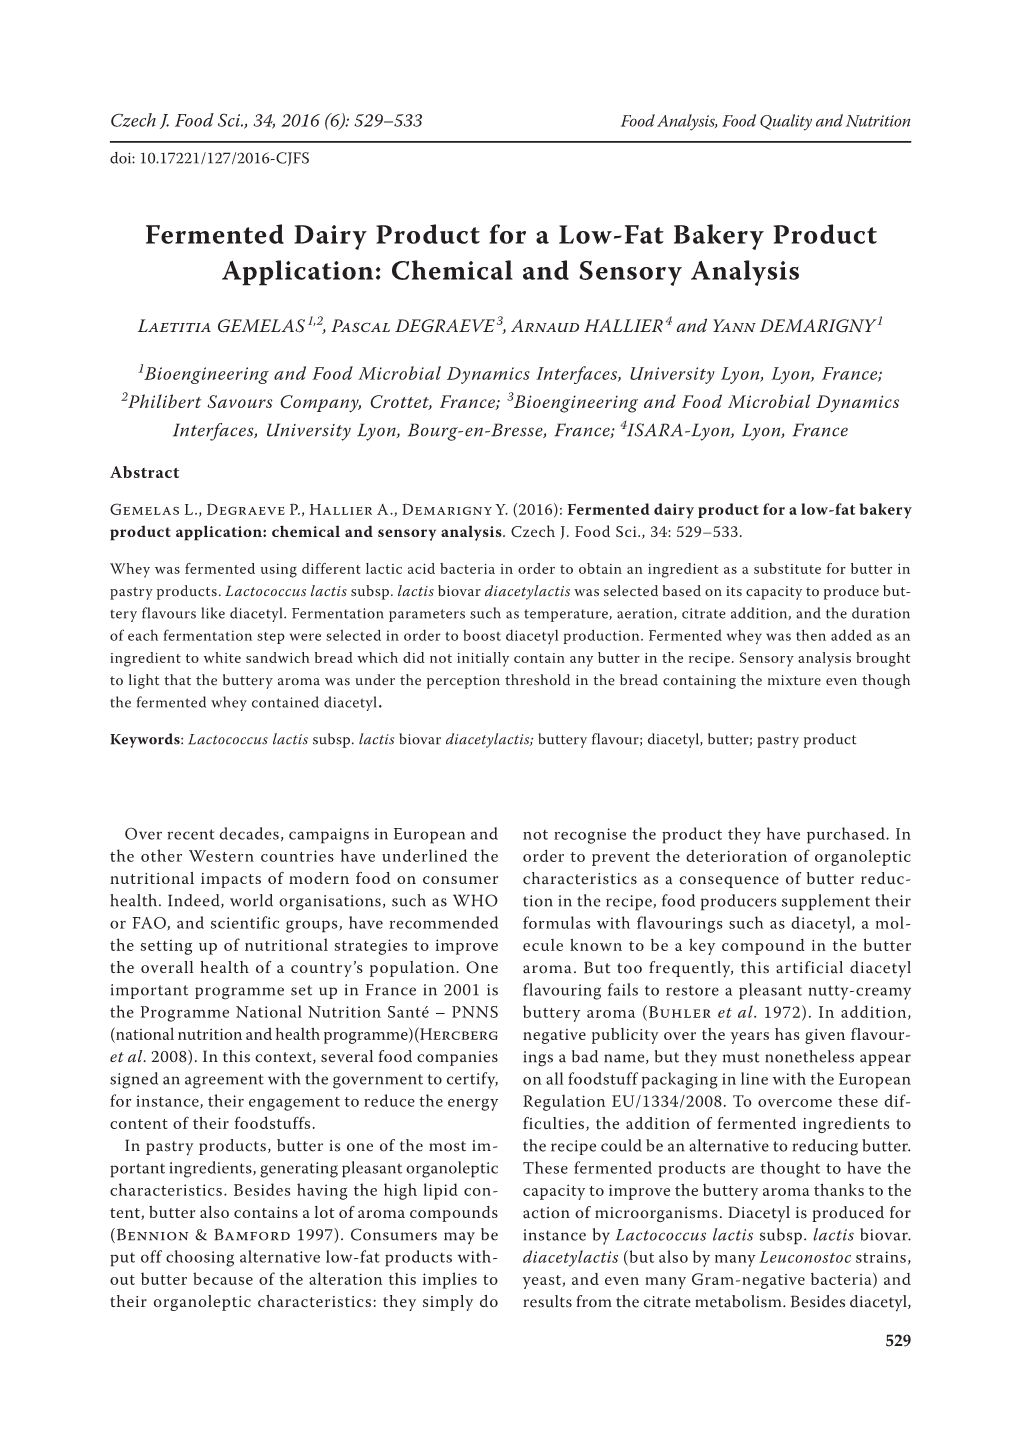 Fermented Dairy Product for a Low-Fat Bakery Product Application: Chemical and Sensory Analysis